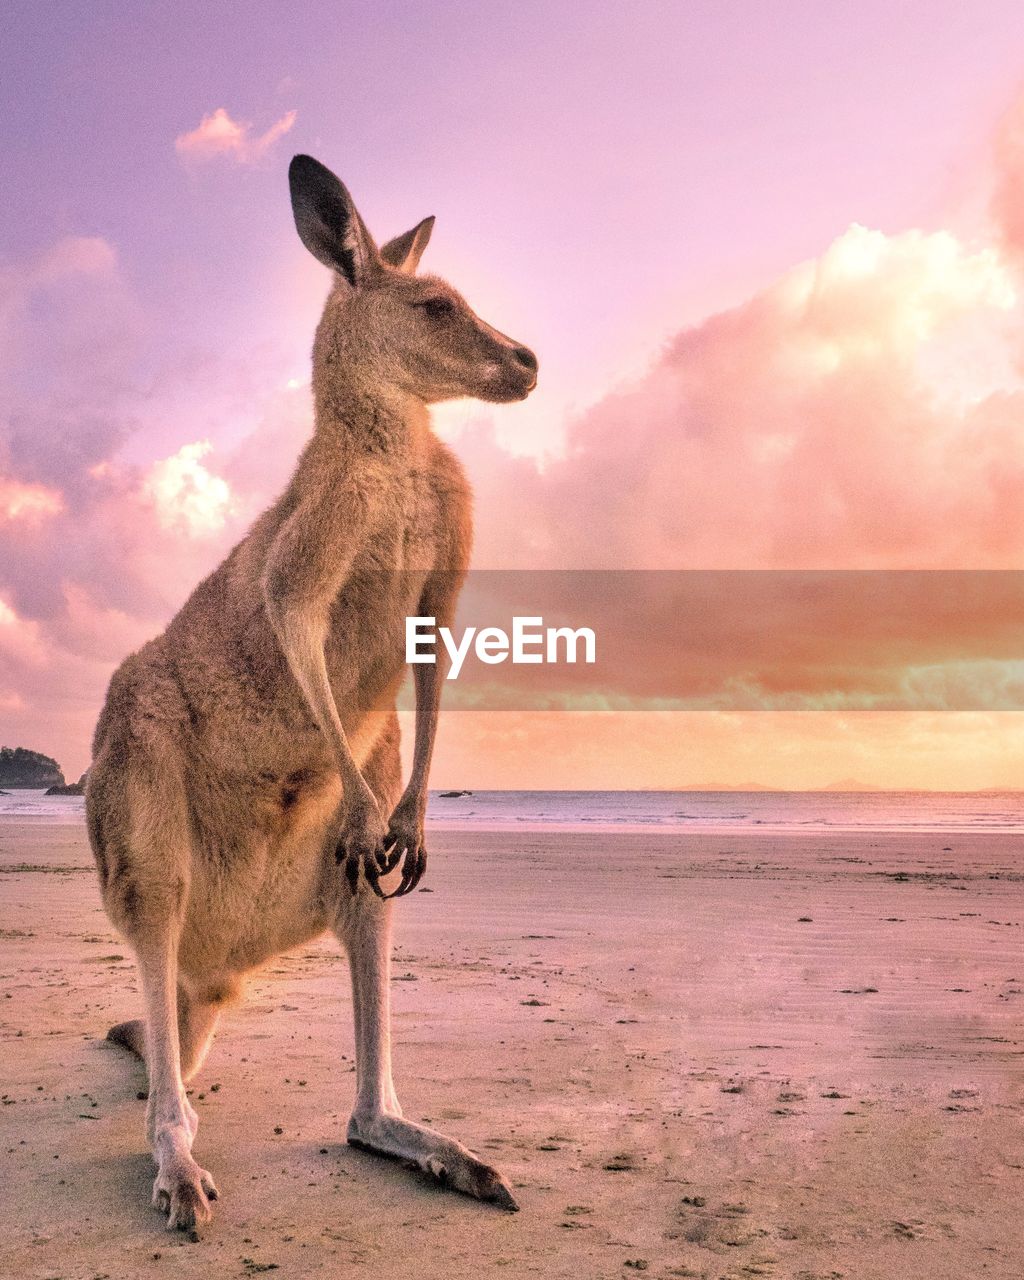 Kangaroo looking away while standing at beach against sky during sunset